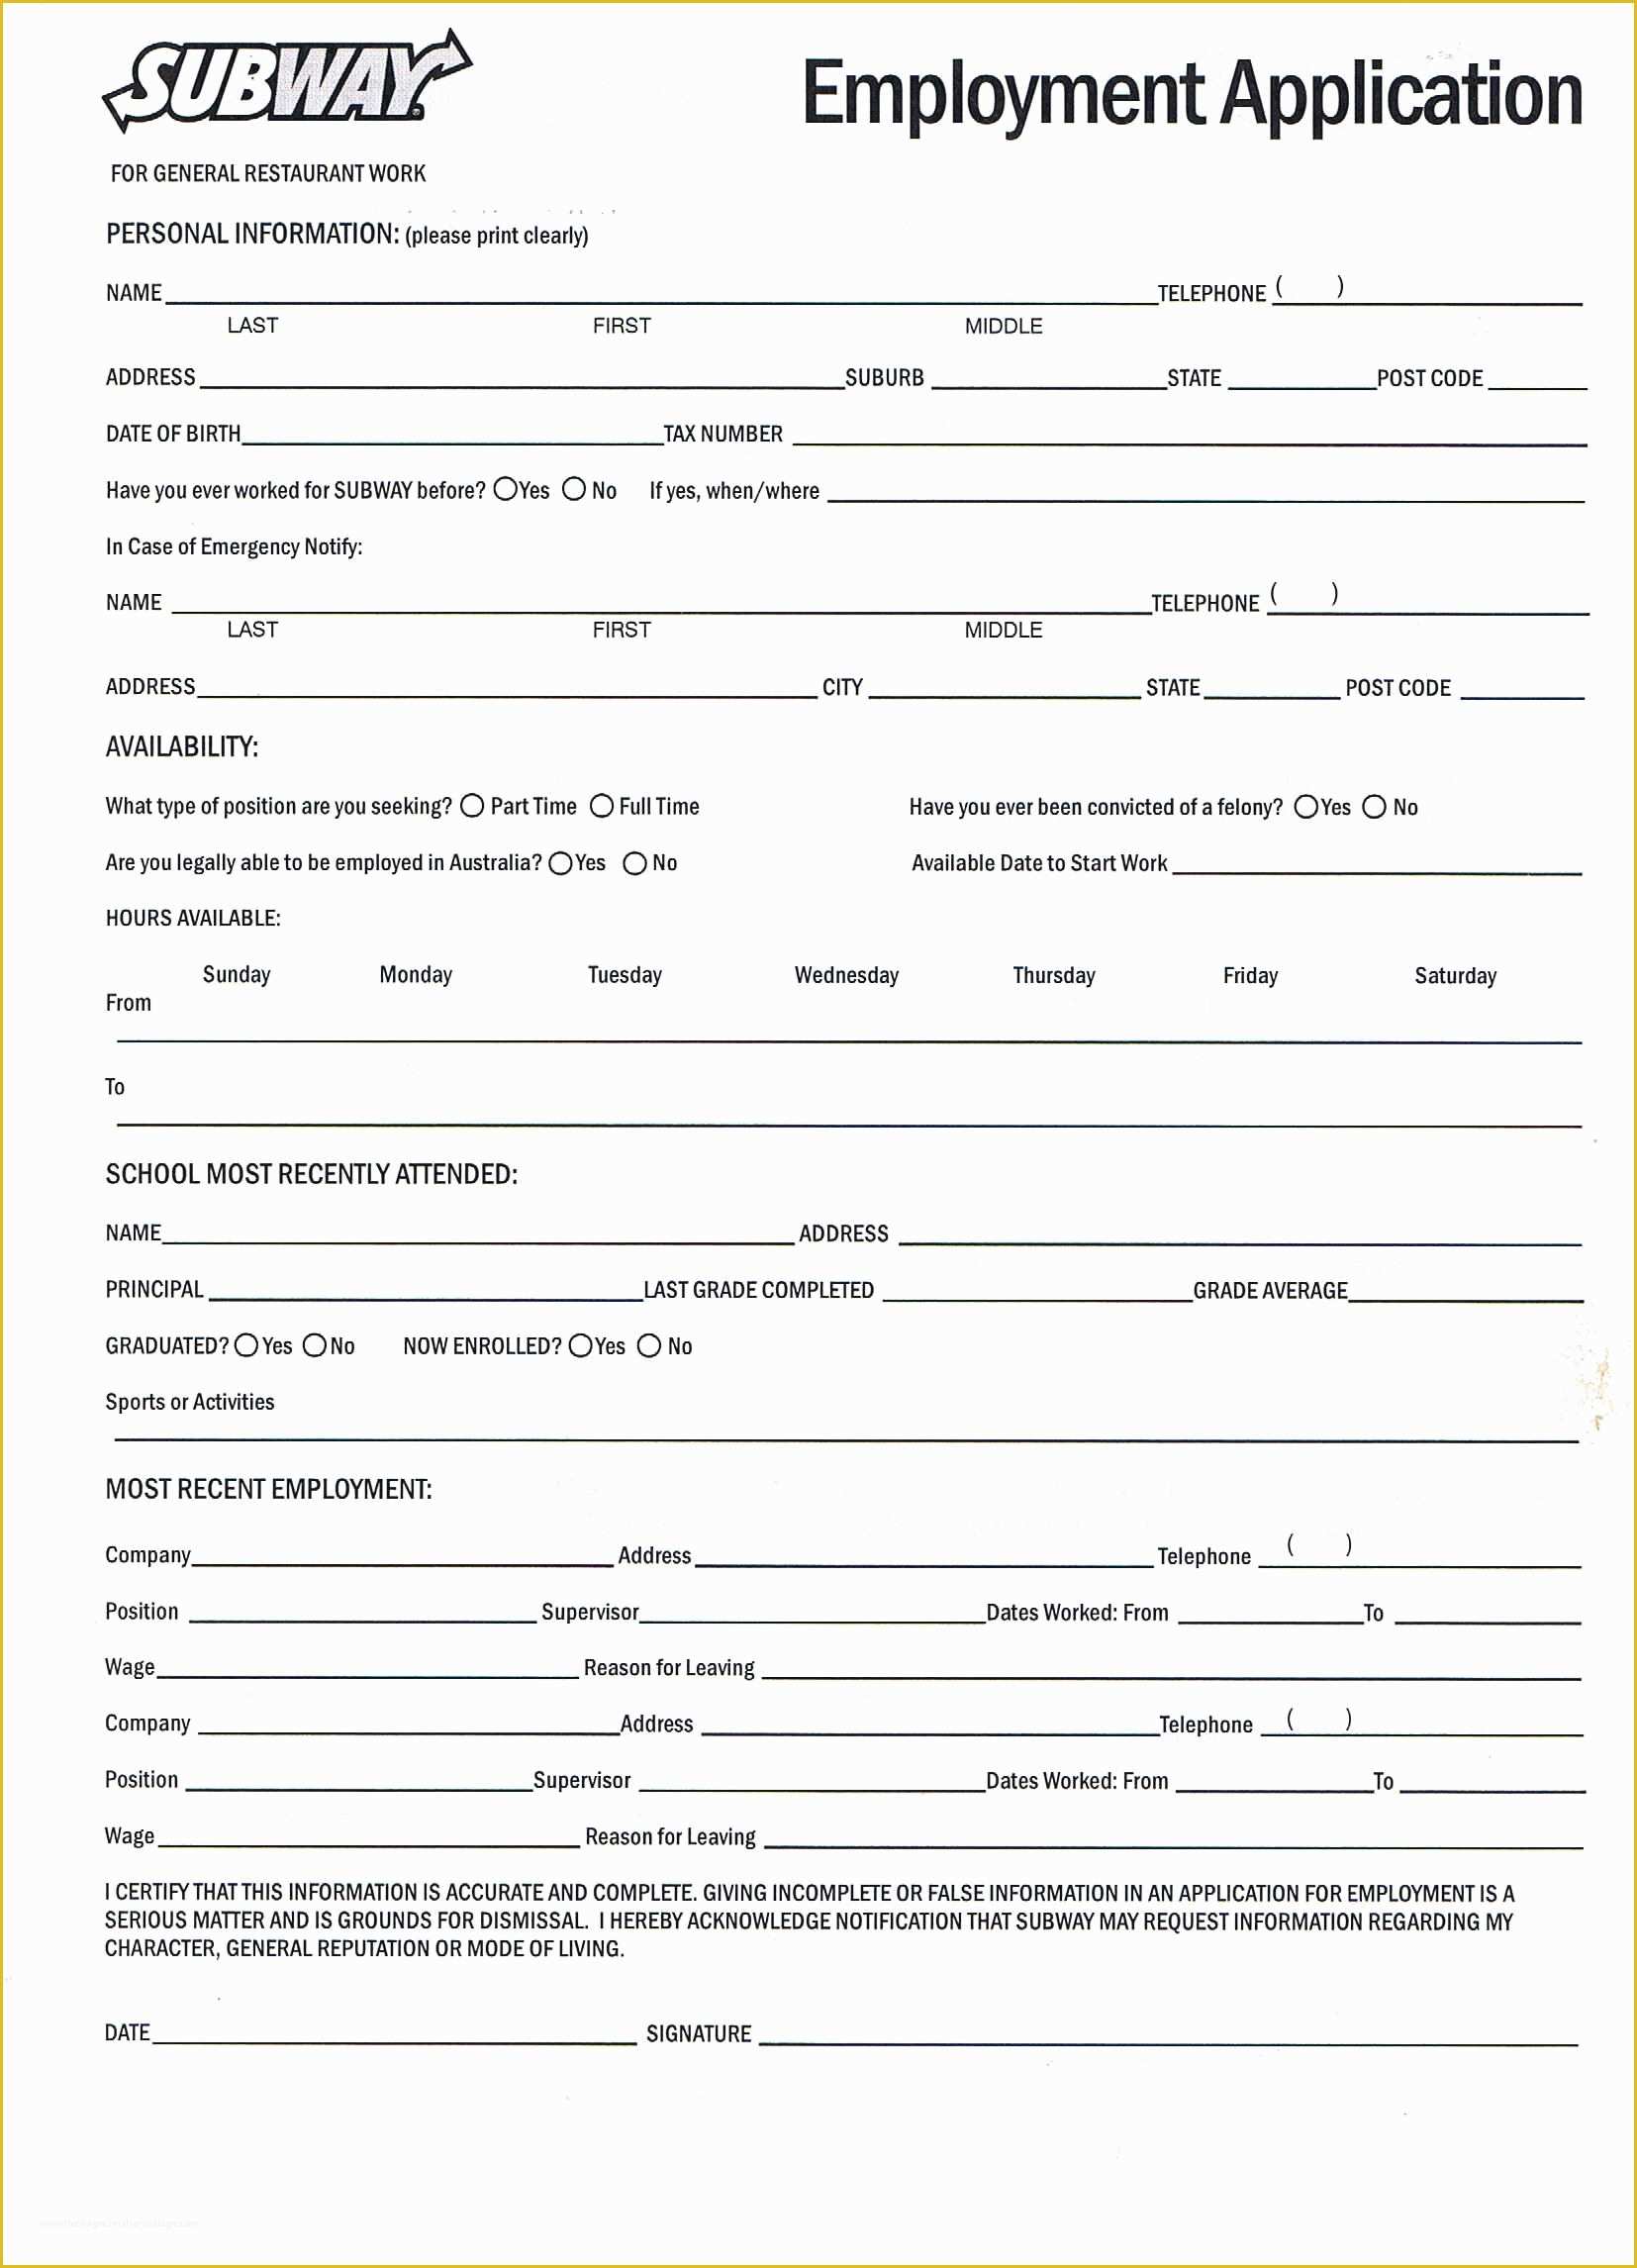 Free Salon Application Template Of Printable Job Application forms Online forms Download and